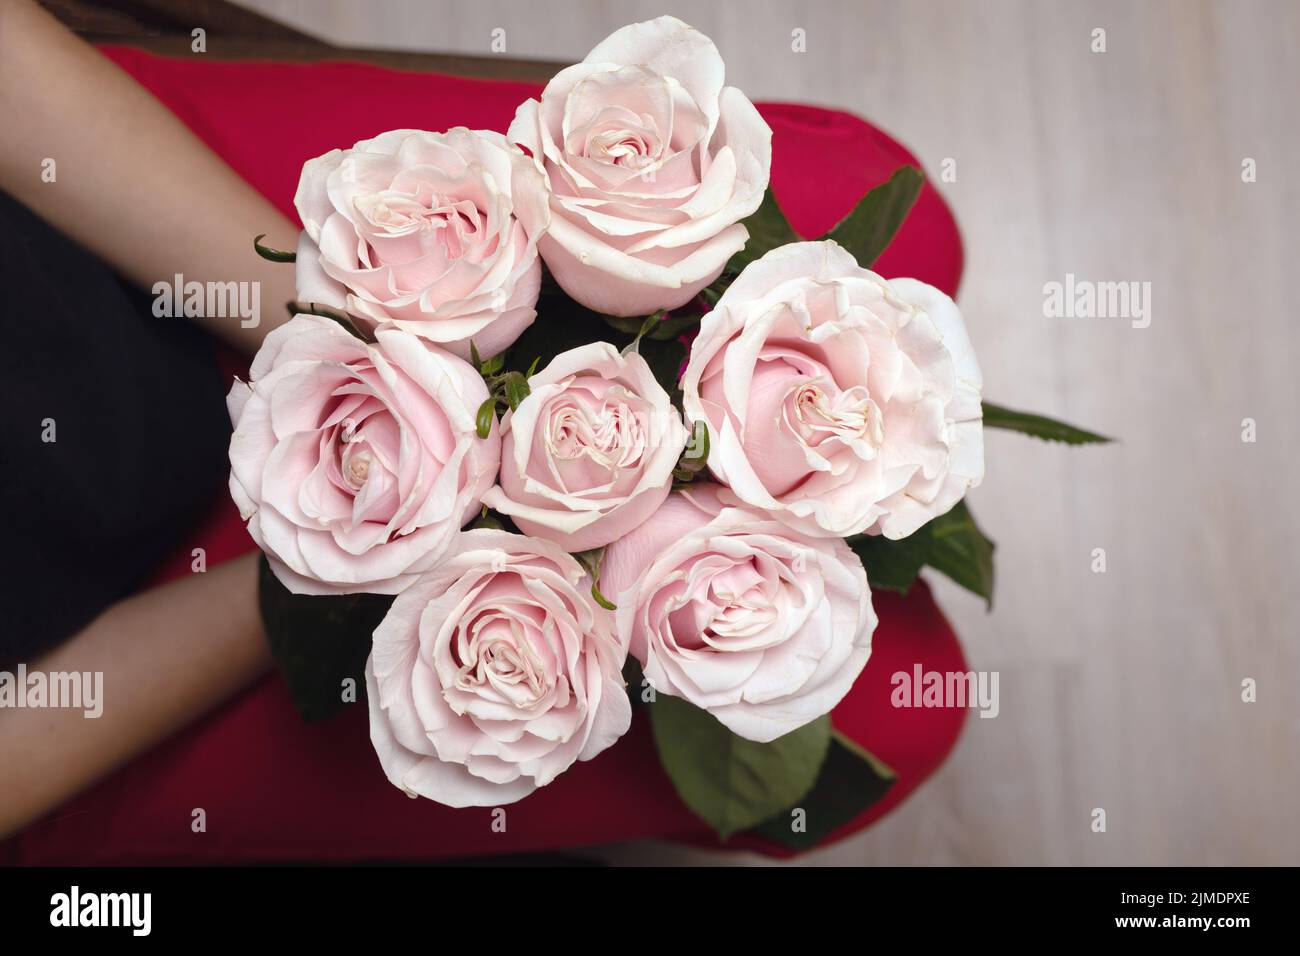 Girl holding flowers on her lap. gift bouquet of soft pink roses Stock Photo